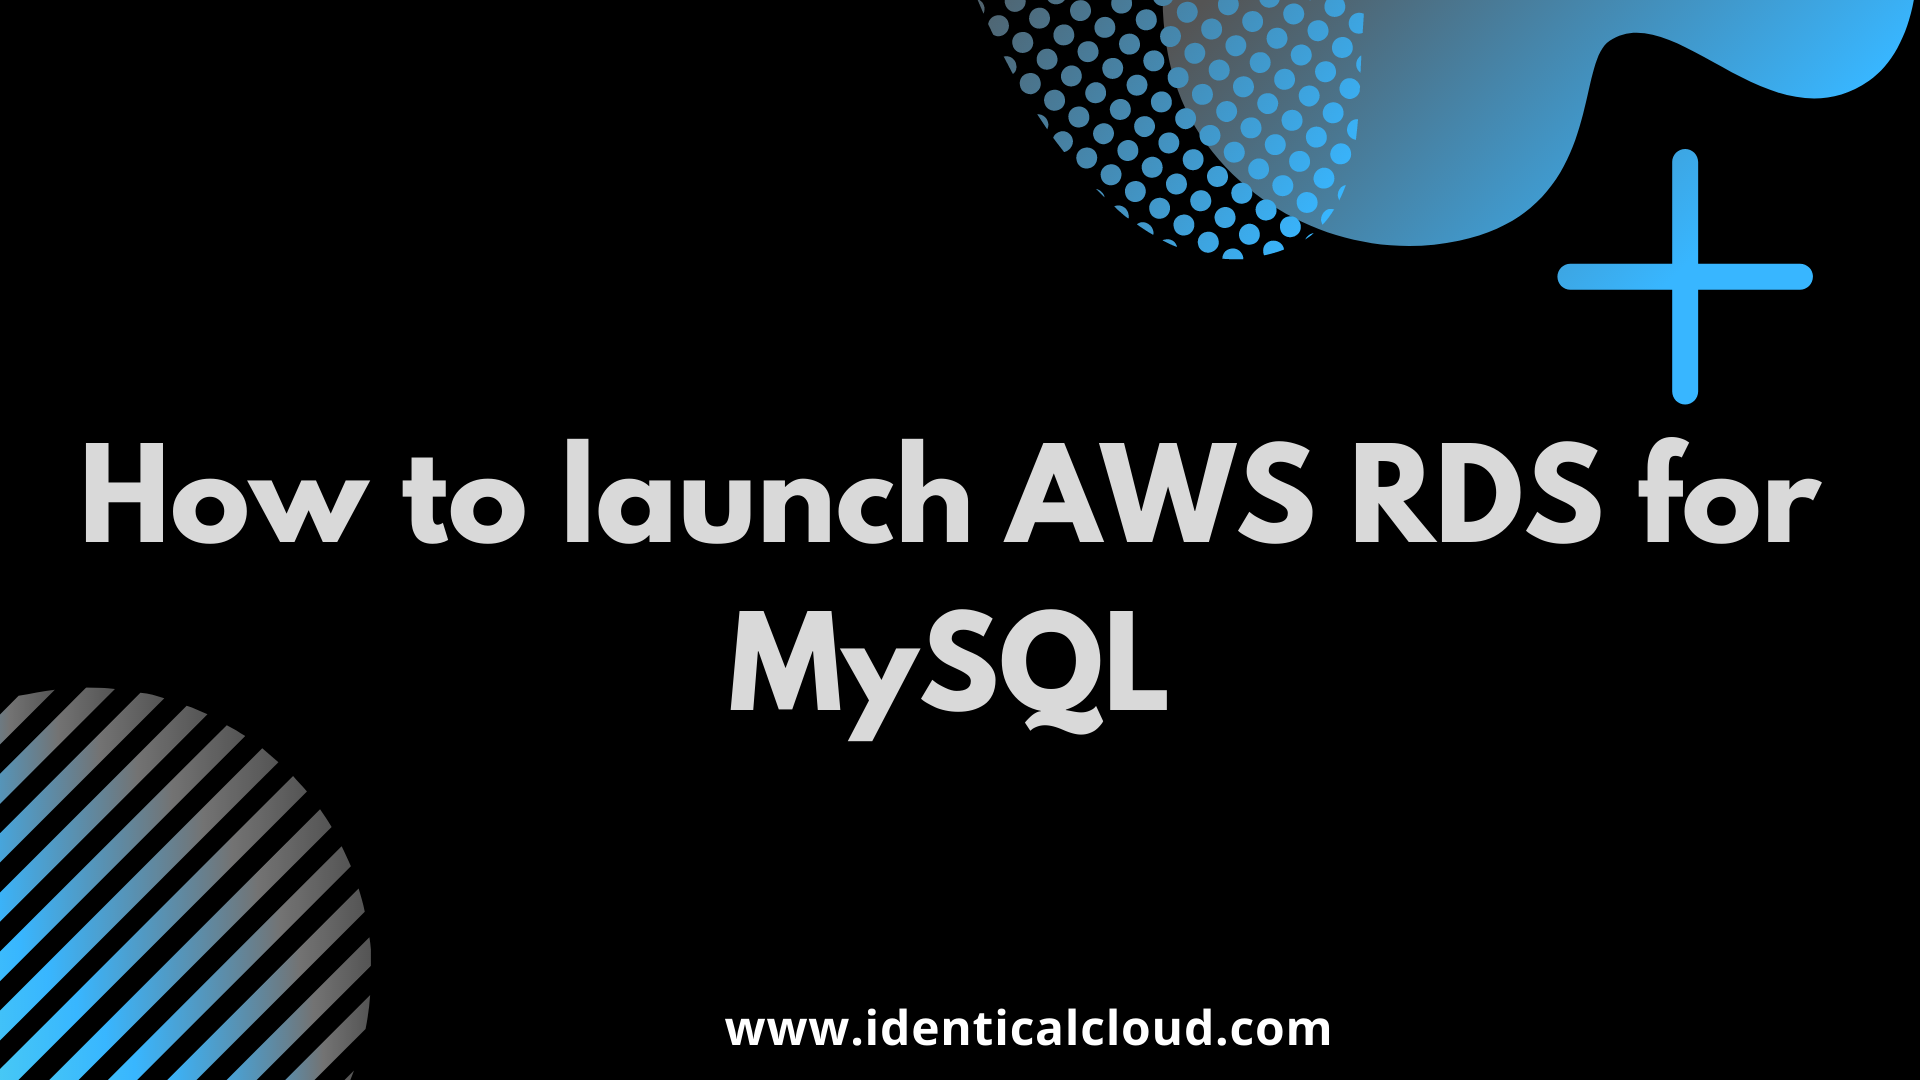 How to launch AWS RDS for MySQL